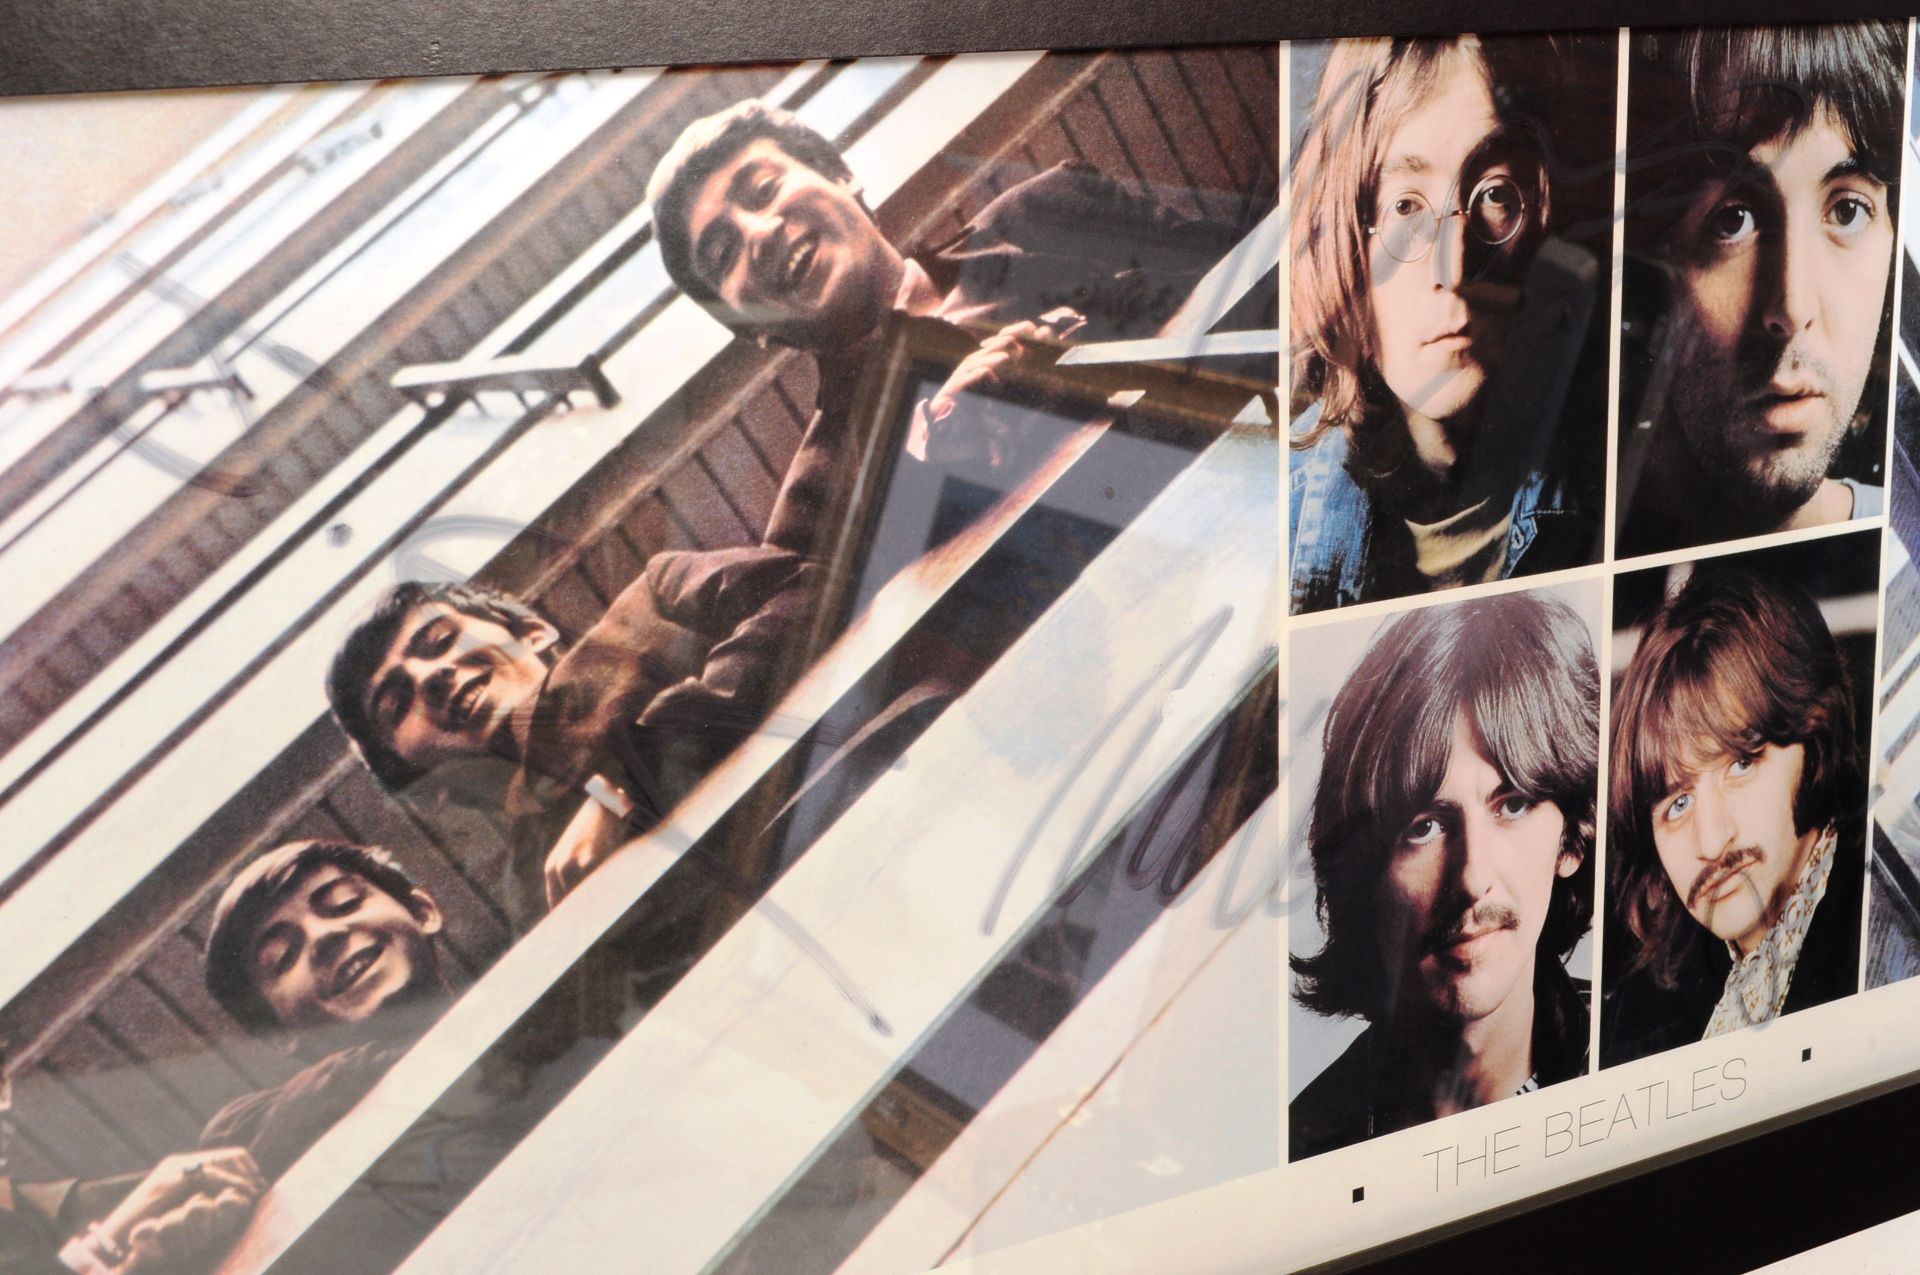 TWO MATCHING APPLE CORPORATION BEATLES PICTURE POSTER PRINTS - Image 9 of 9